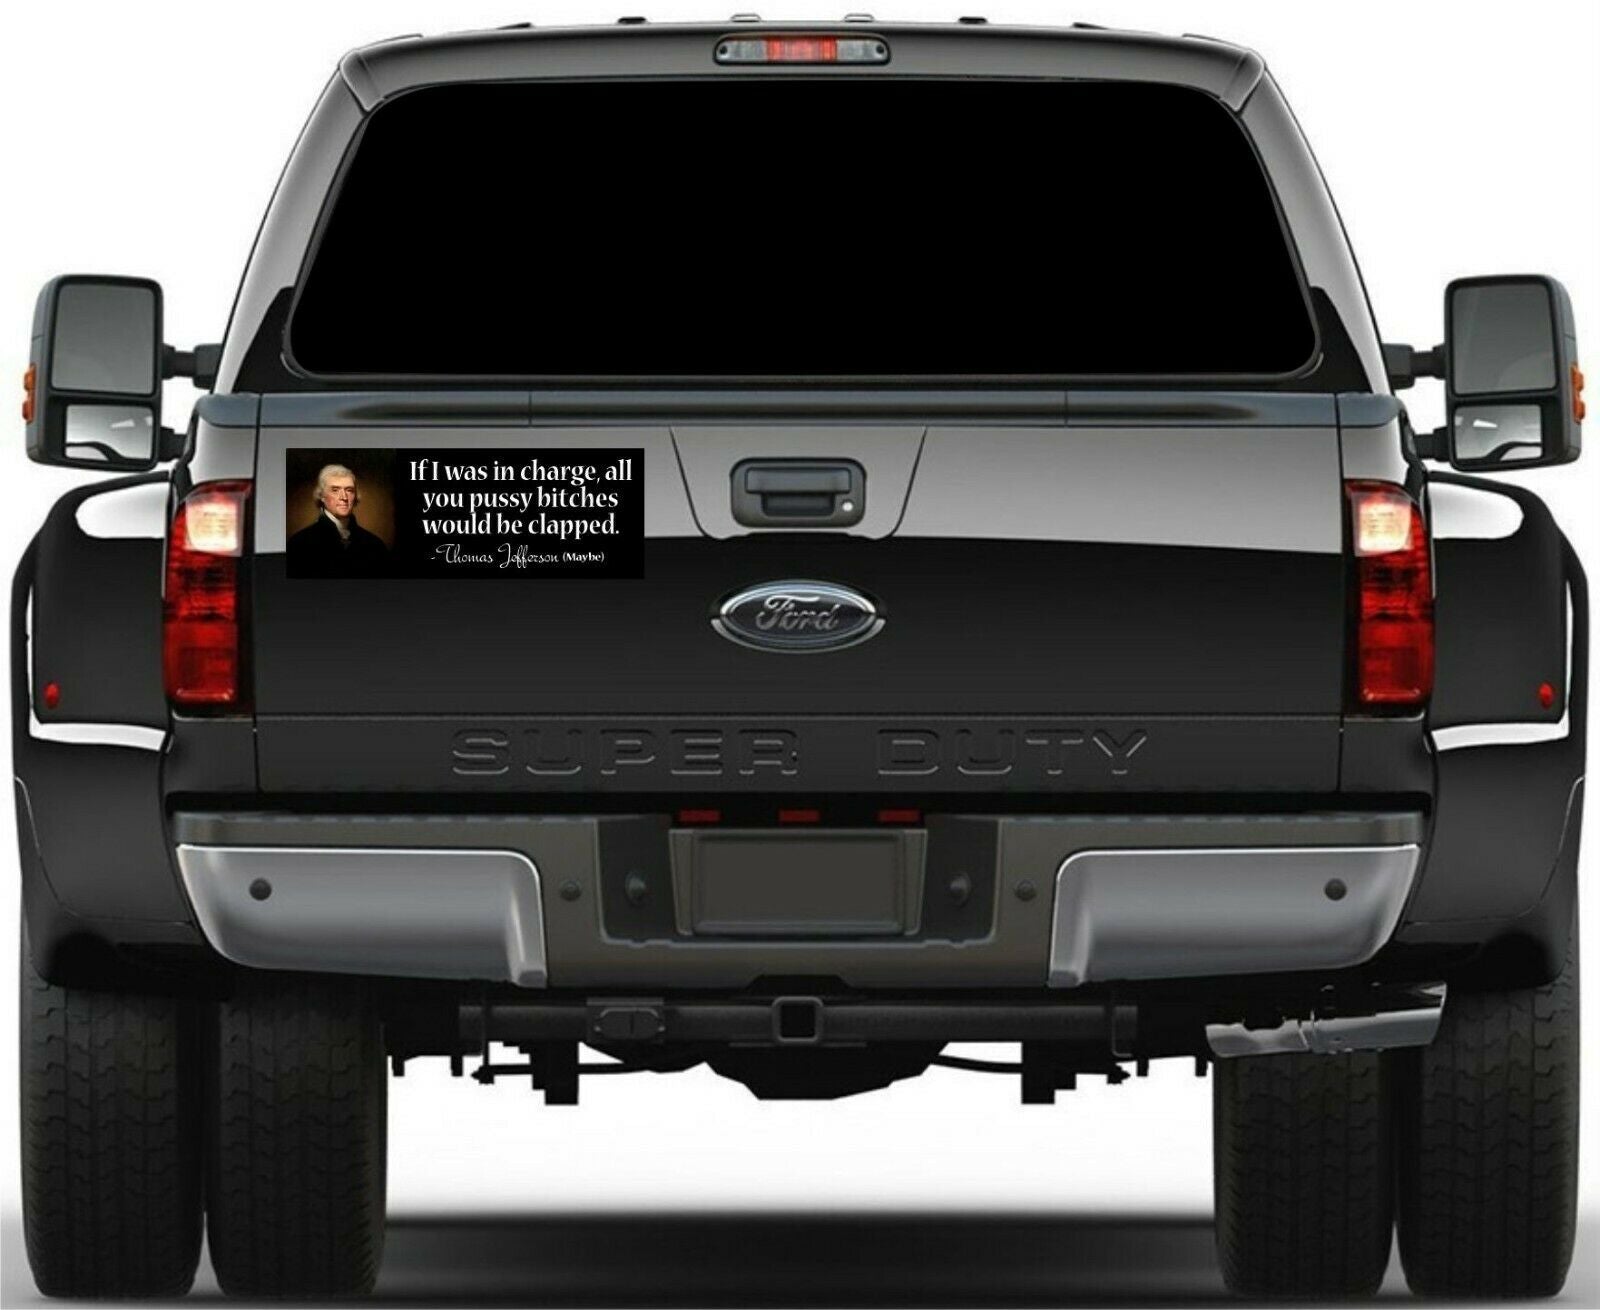 Thomas Jefferson Bumper Sticker Pussy Bit*hes would be clapped sticker 8.7" x 3" - Powercall Sirens LLC